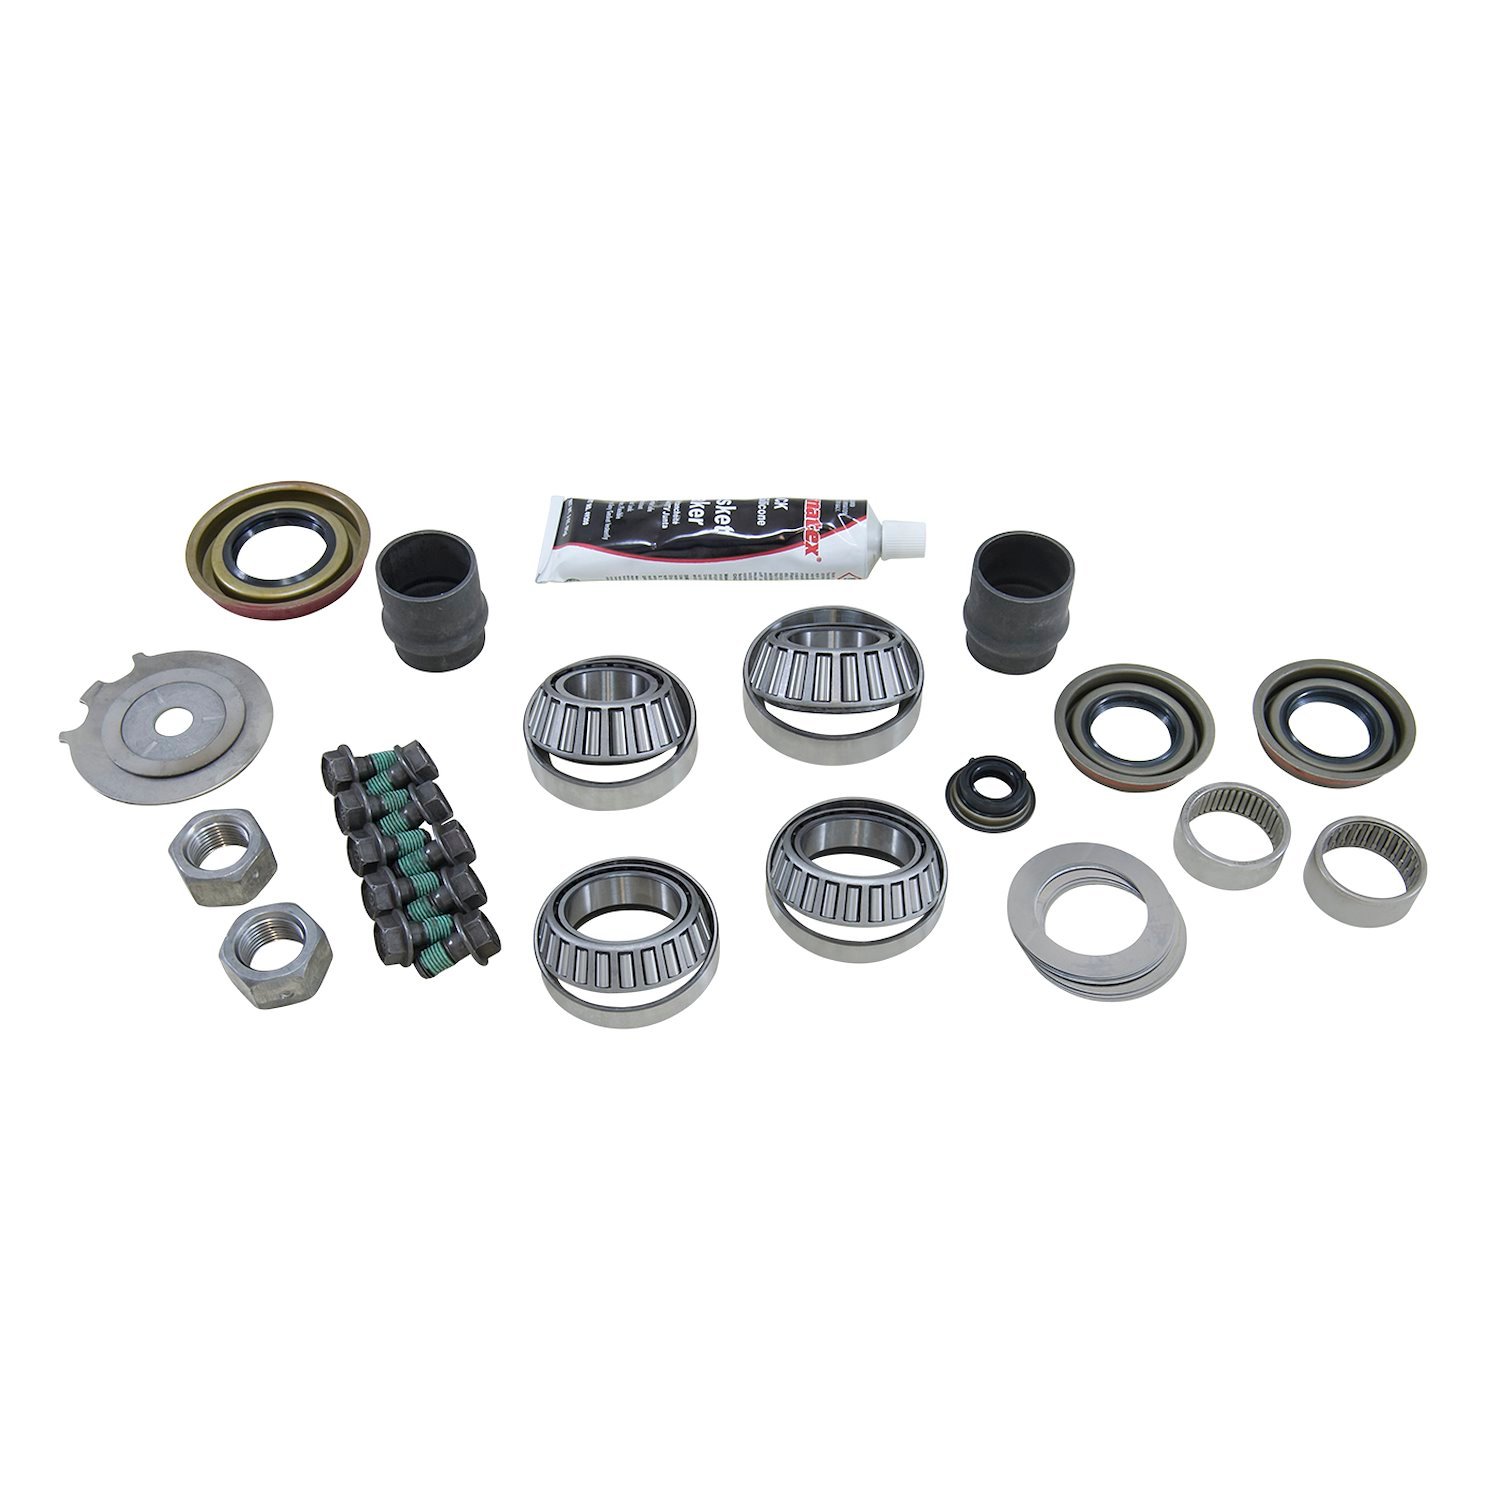 Master Overhaul Kit For '83-'97 GM S10 And